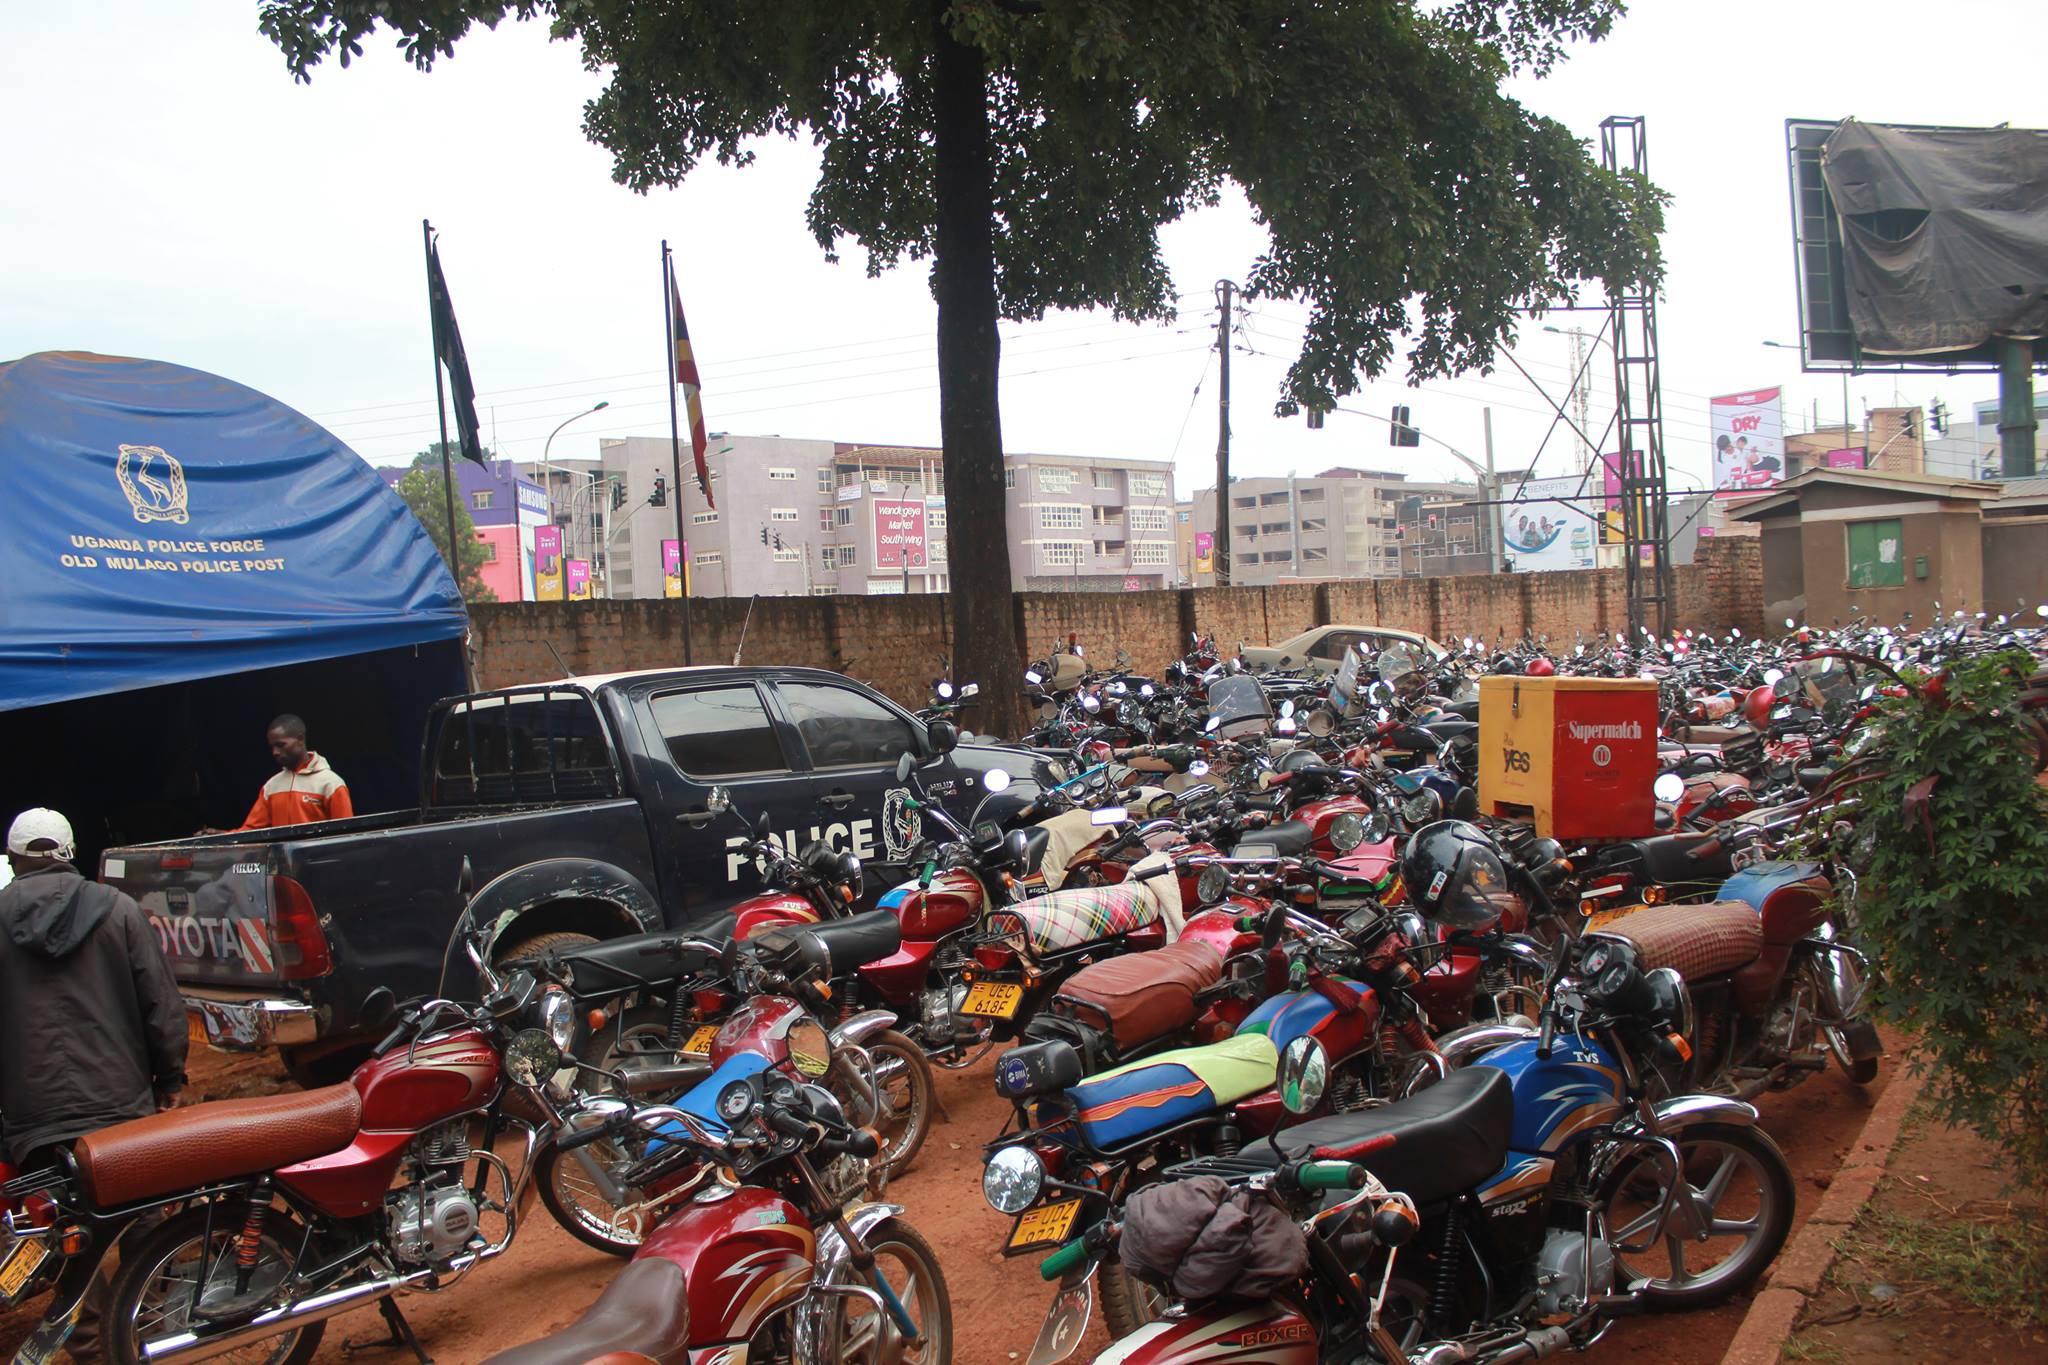 Over 40 boda bodas were today confiscated by police due to lack of traffic requirements such as helmets, licenses etc